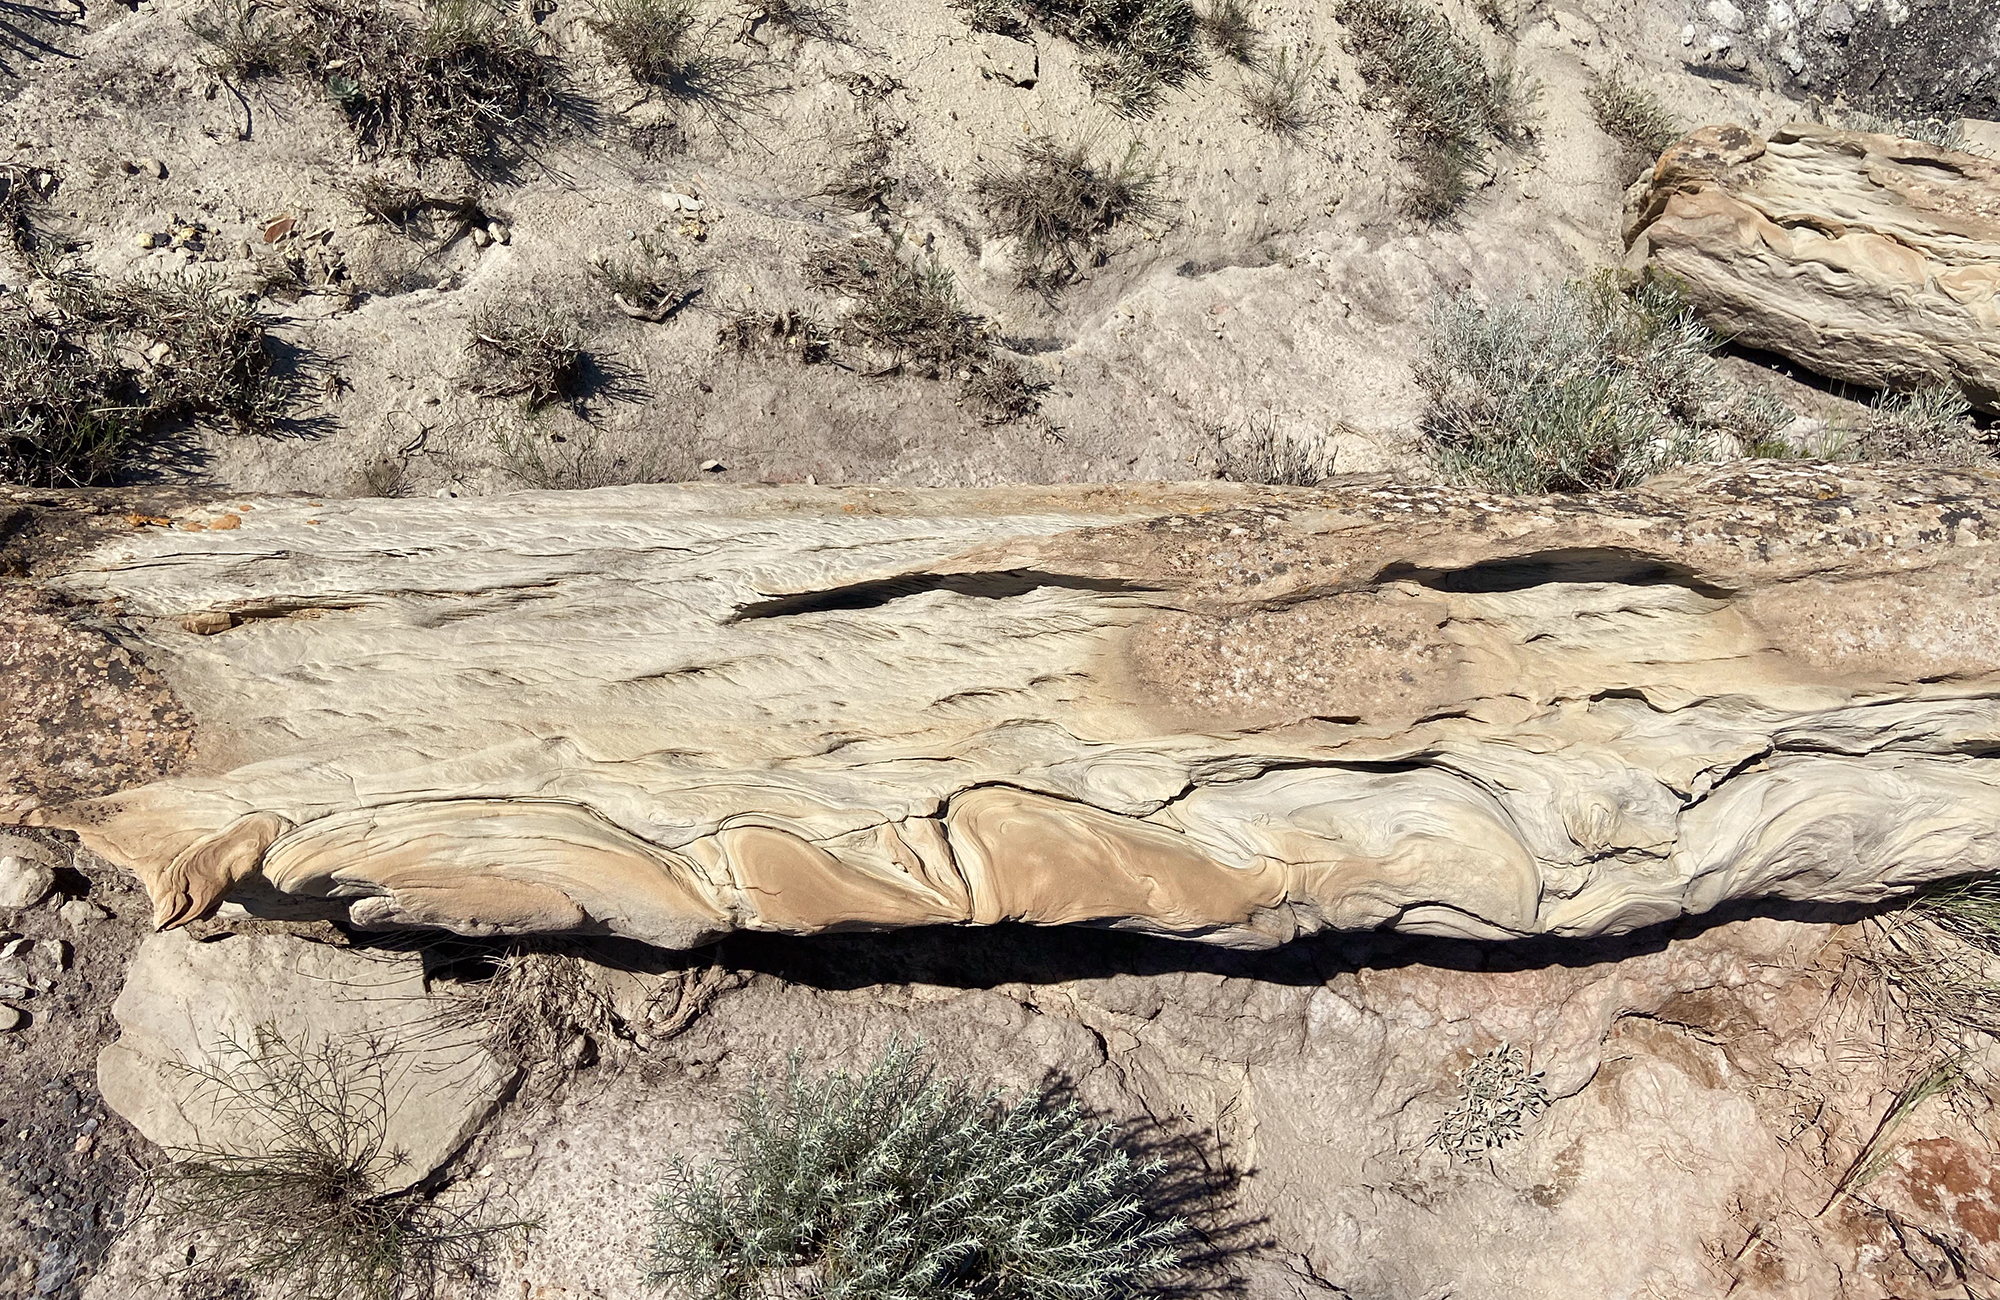 A large piece of light colored petrified wood.